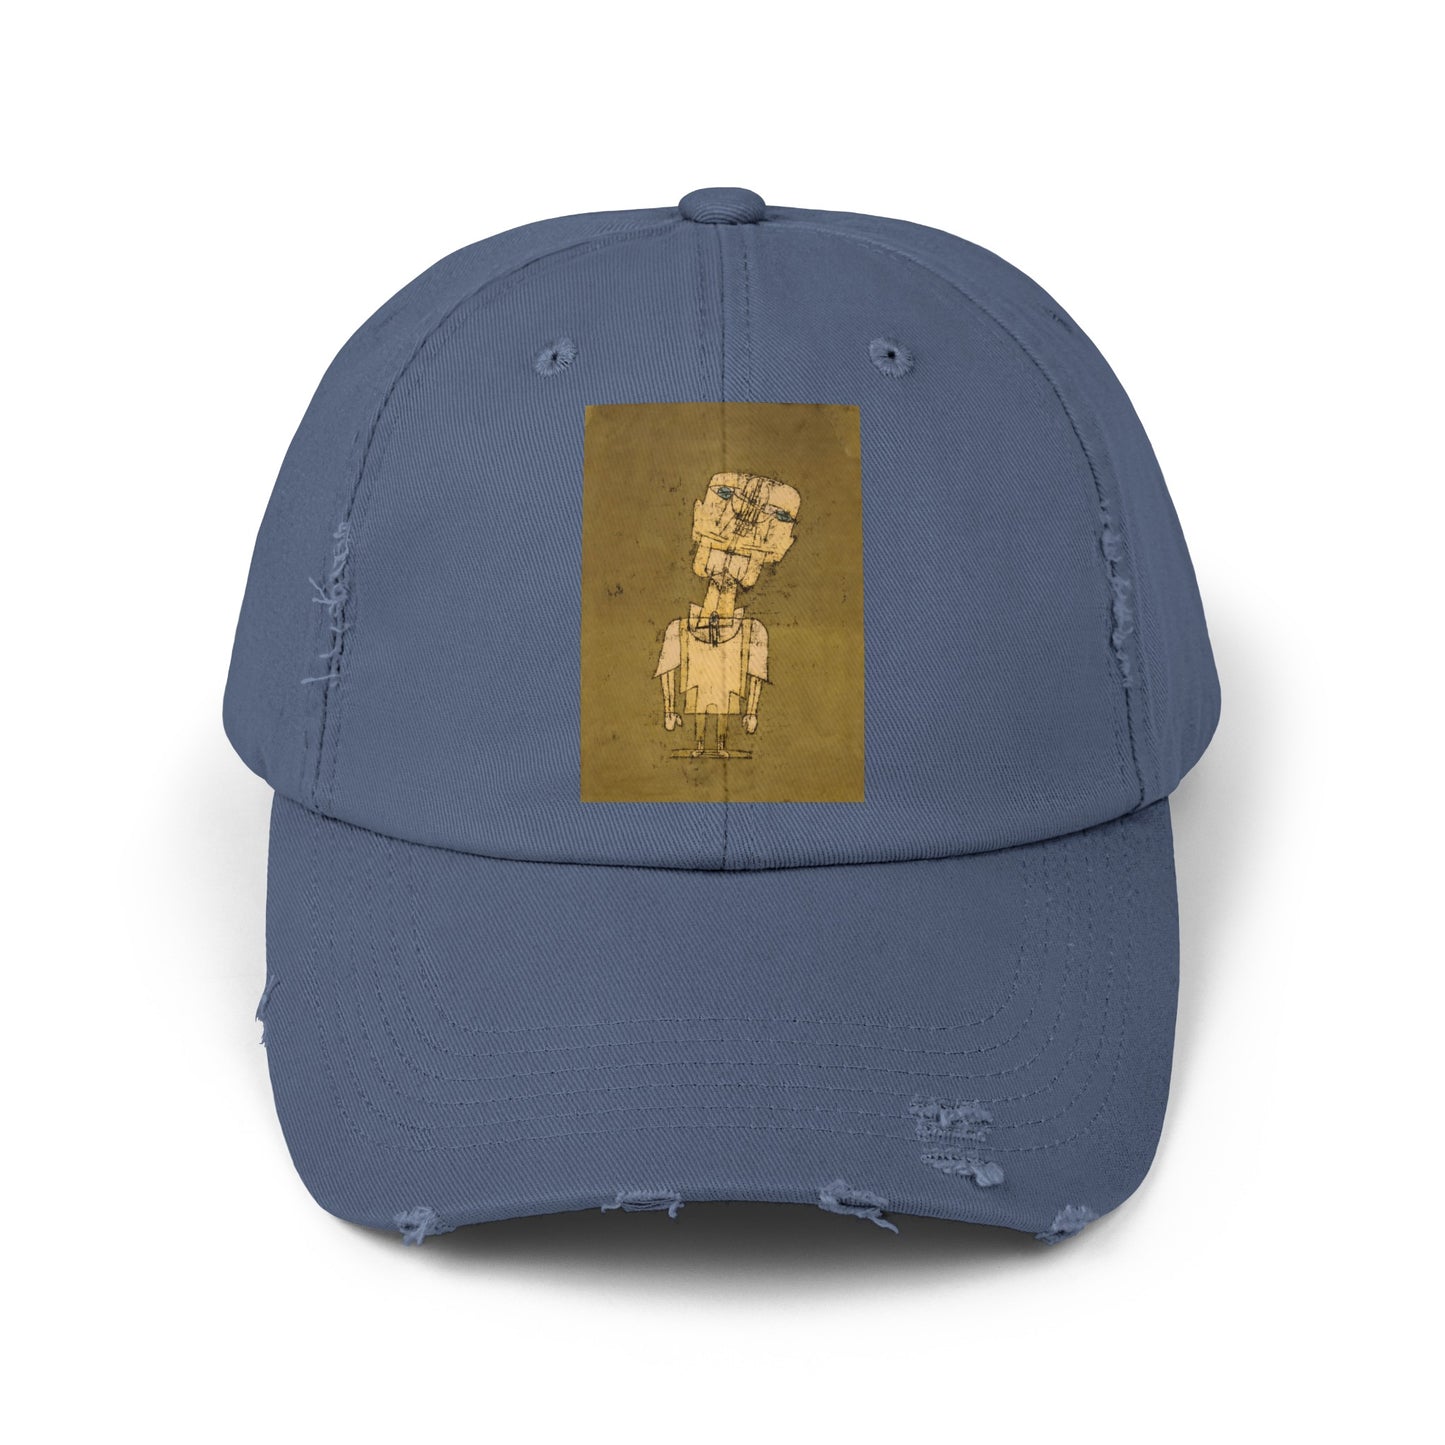 a blue baseball cap with a picture of a man on it